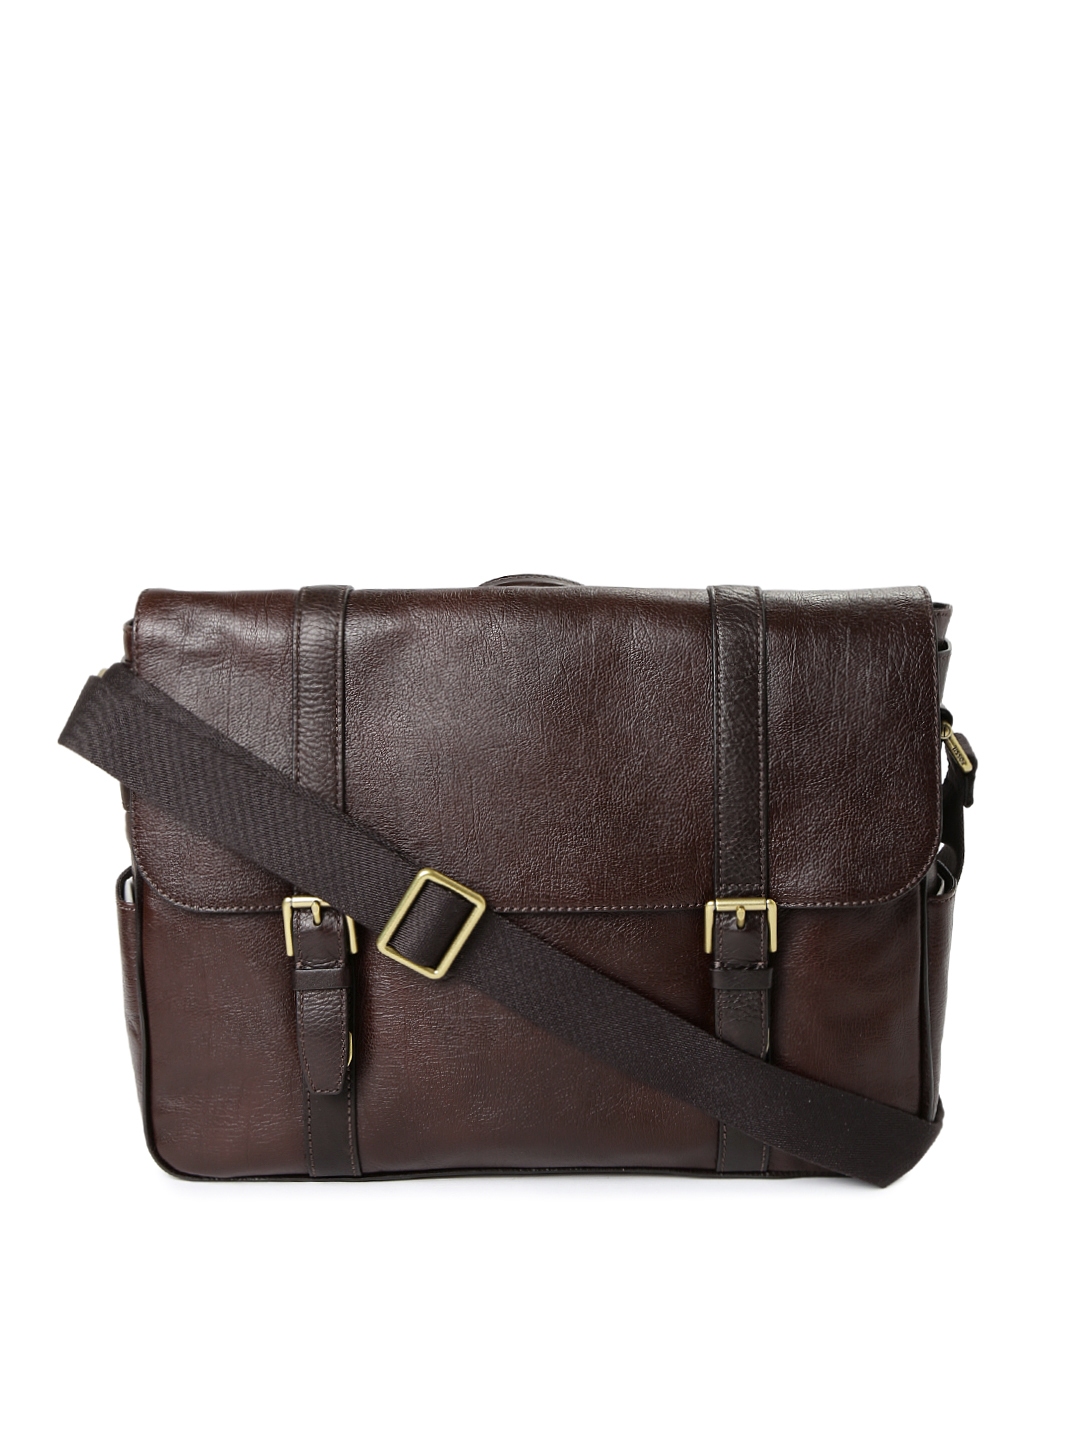 Details 64+ fossil laptop bag india - stylex.vn